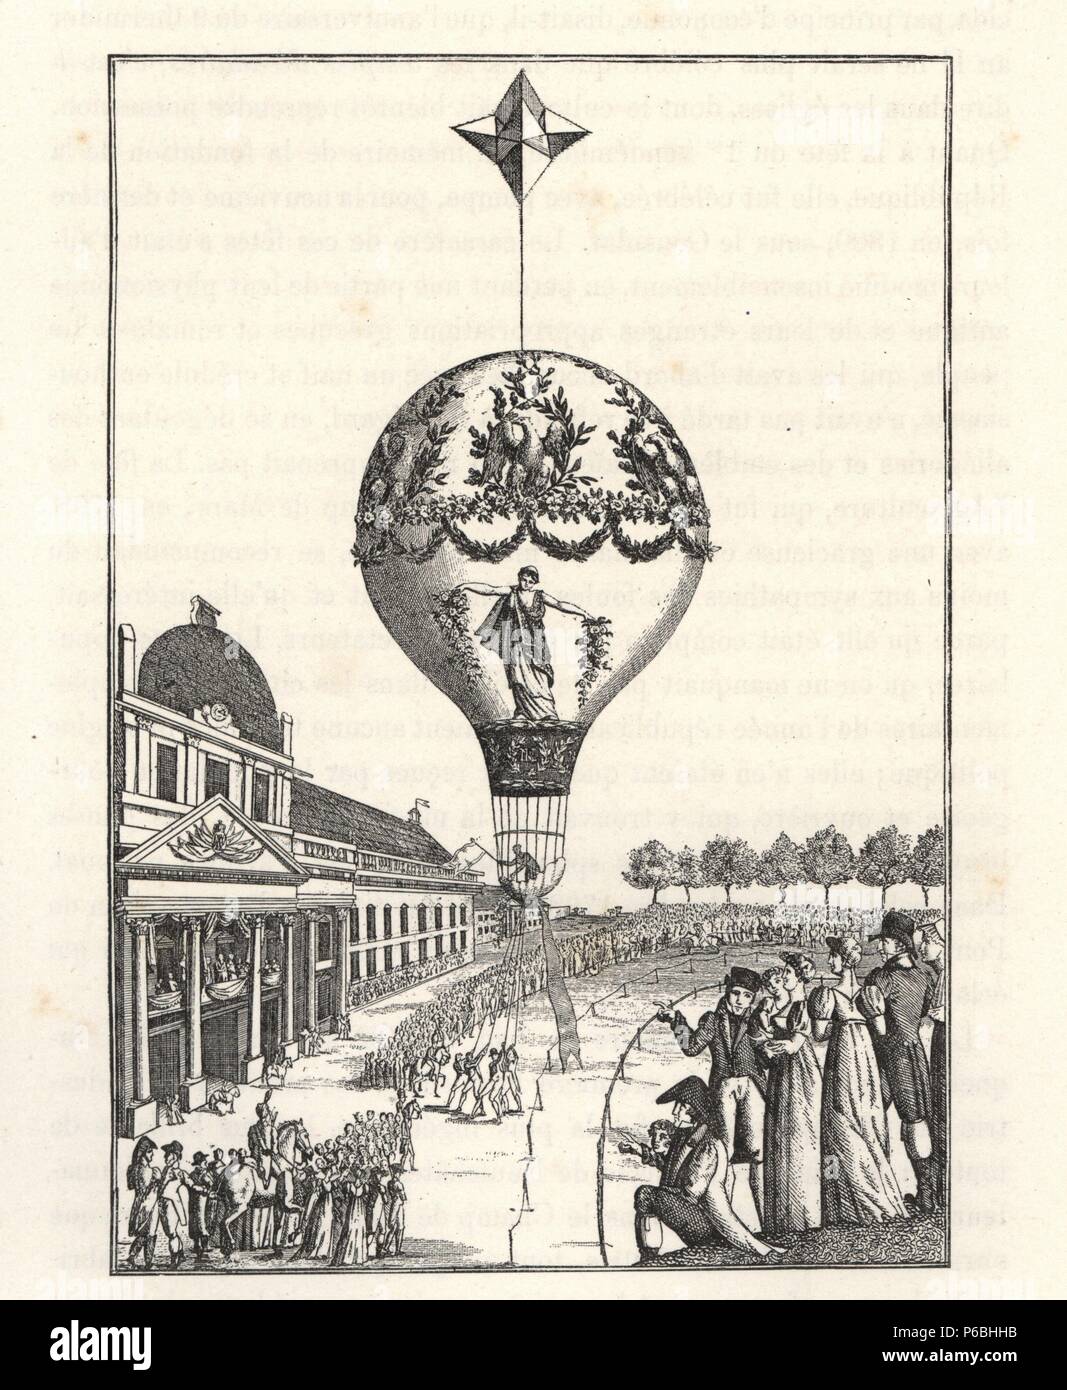 Ascension of a balloon by female balloonist Sophie Blanchard at the Champ de Mars, Paris, June 24, 1810. Engraving from Paul Lacroix's 'Directoire, Consulat et Empire,' Paris, 1884. Stock Photo